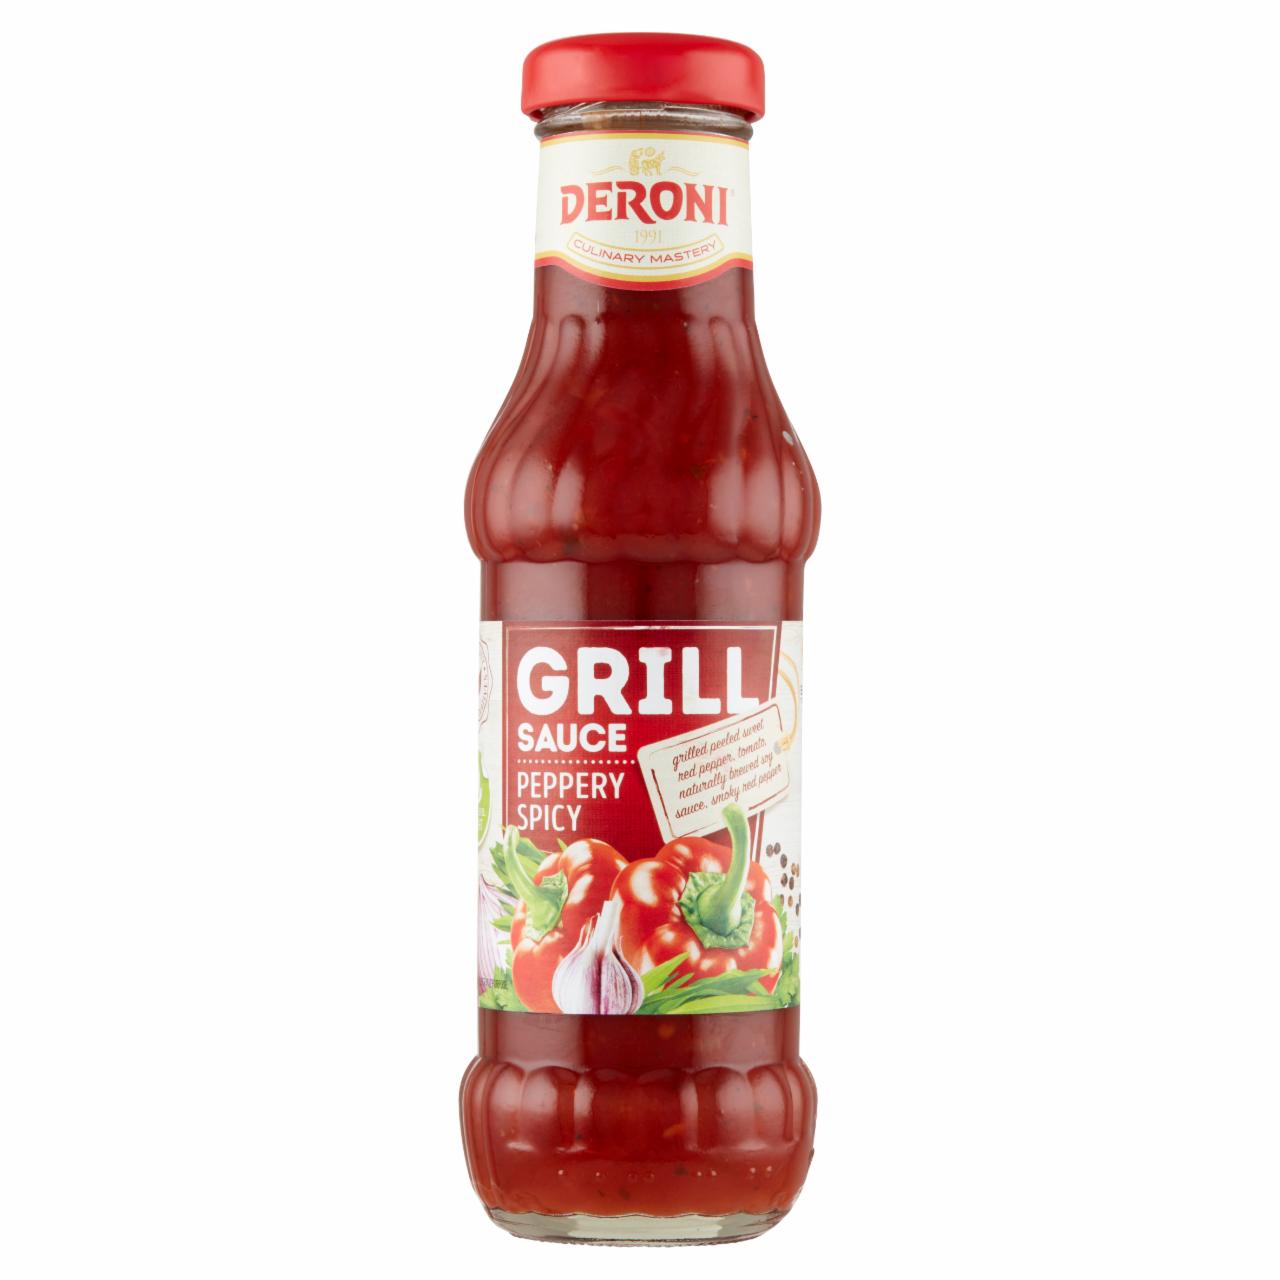 Фото - Соус Peppery Spicy Grill Sauce Deroni